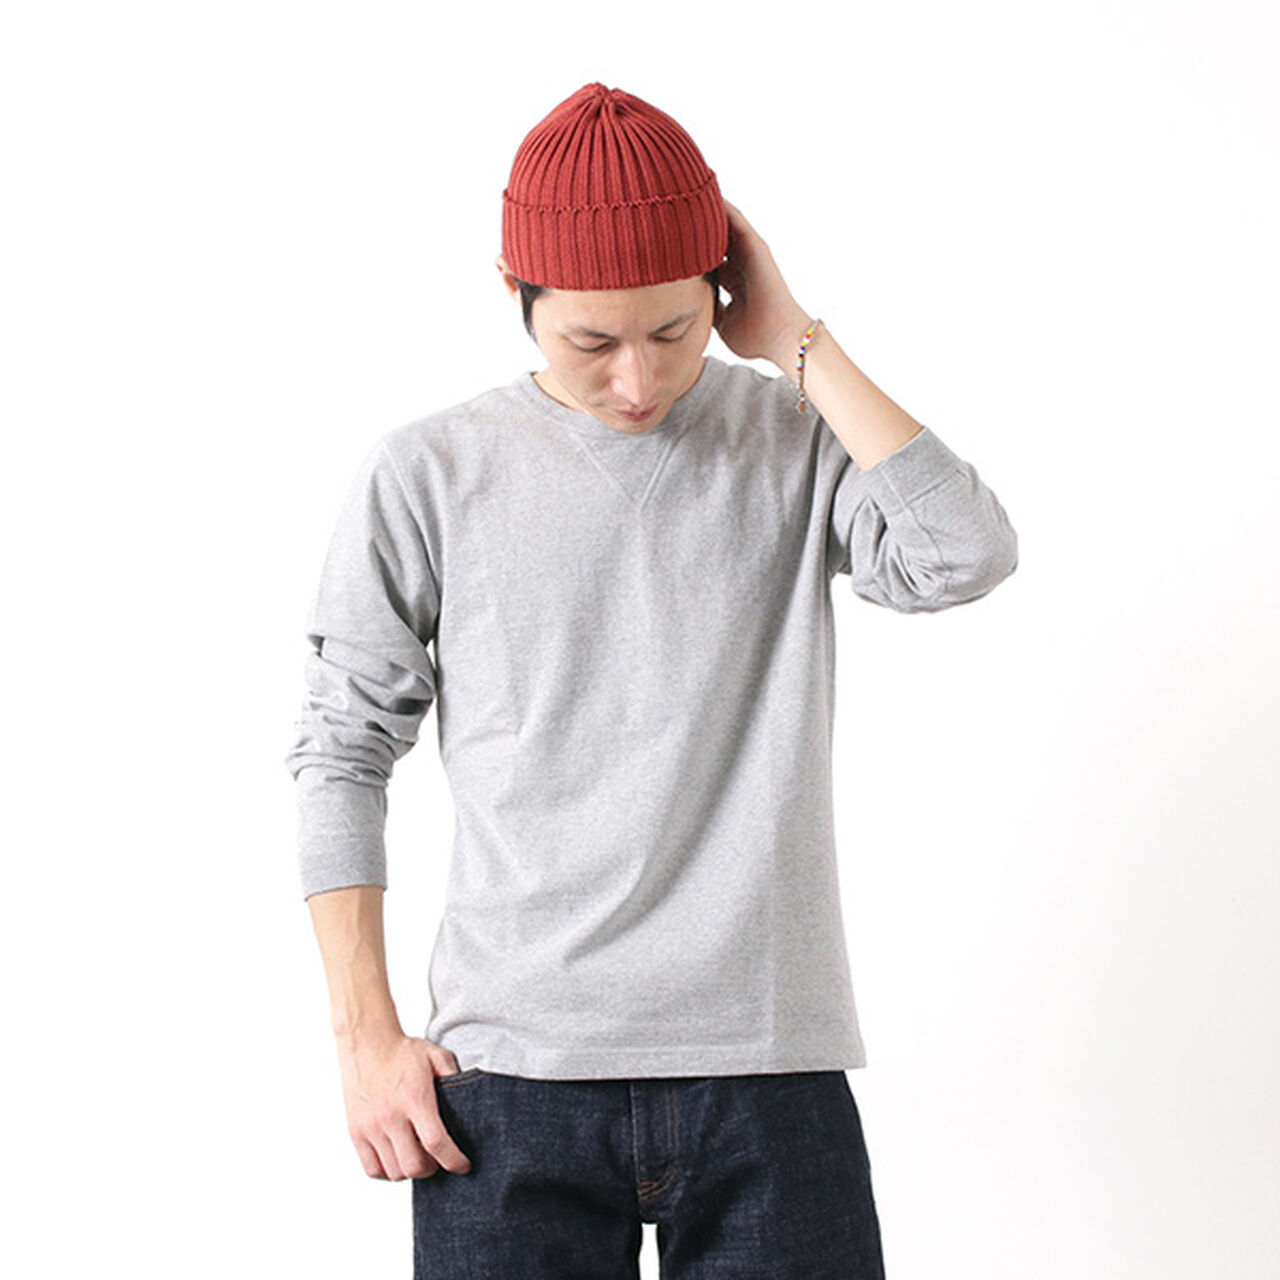 BR-3043 Small Knitted Vintage L/S Crew Neck T-Shirt,Grey, large image number 0